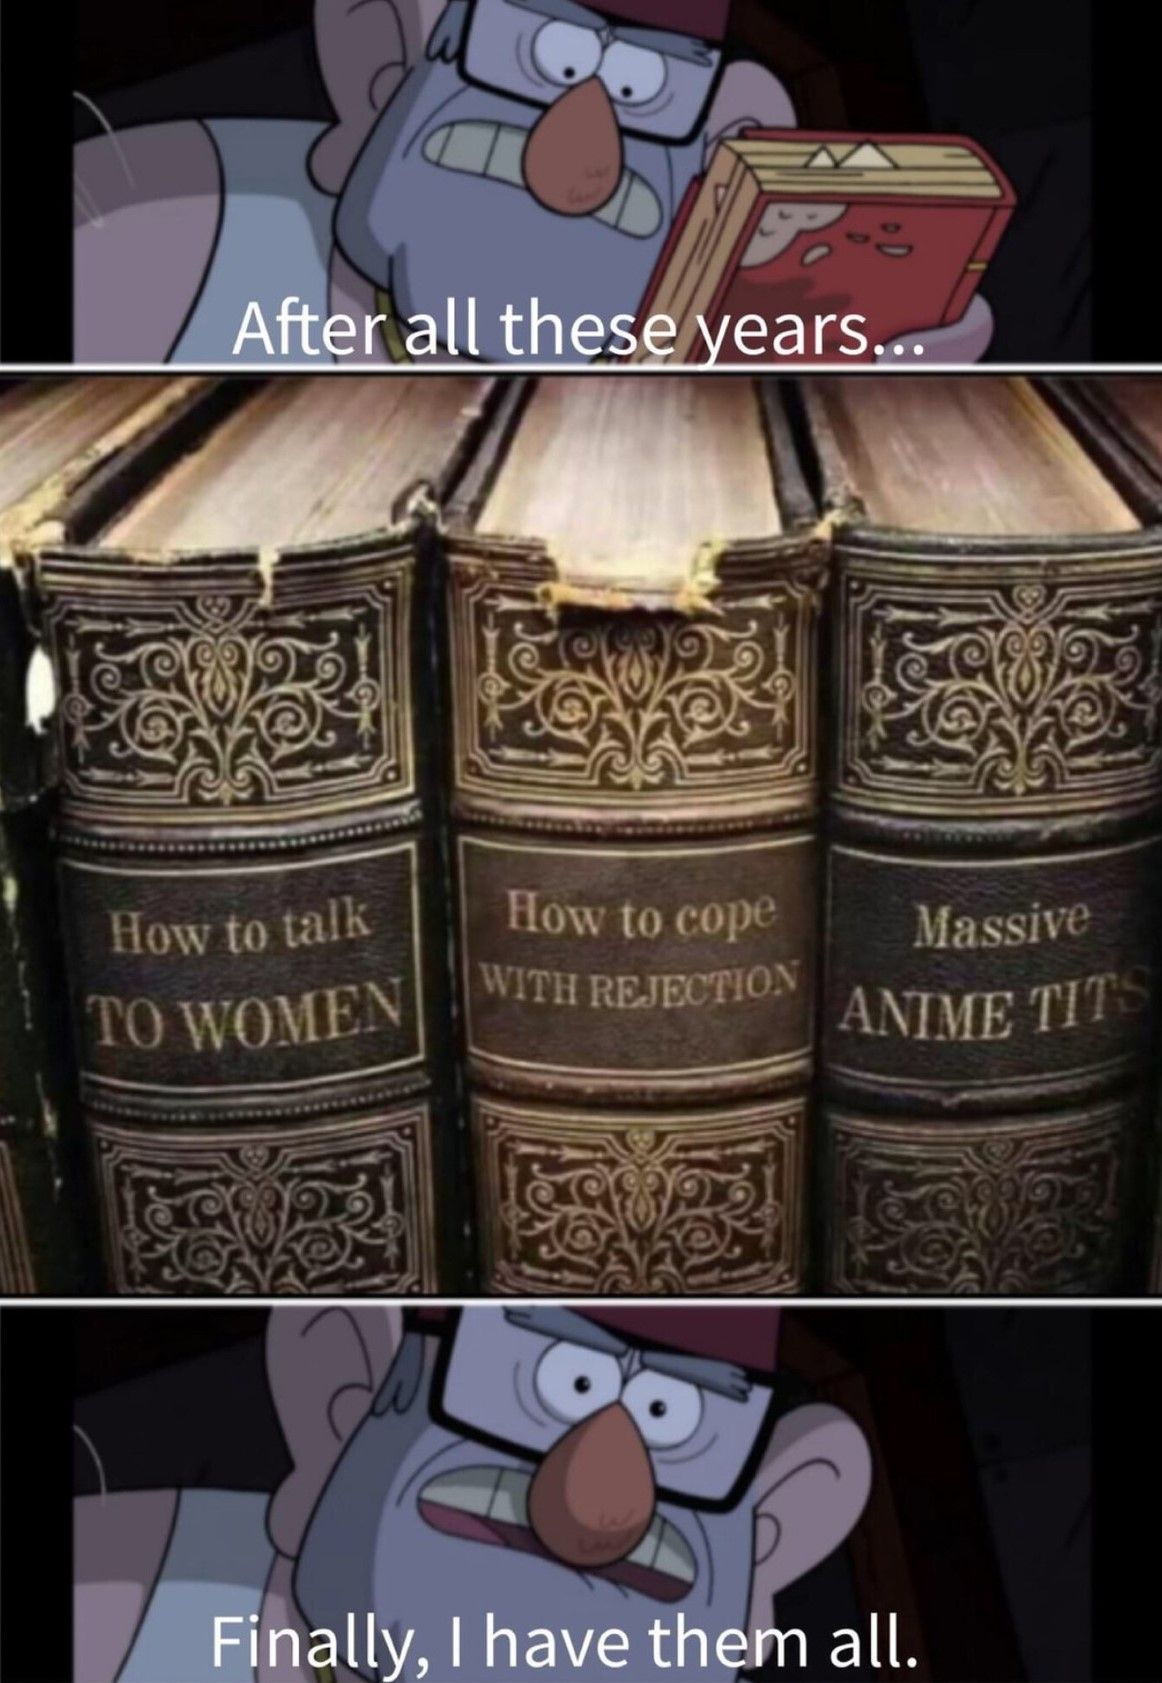 The archives are now complete